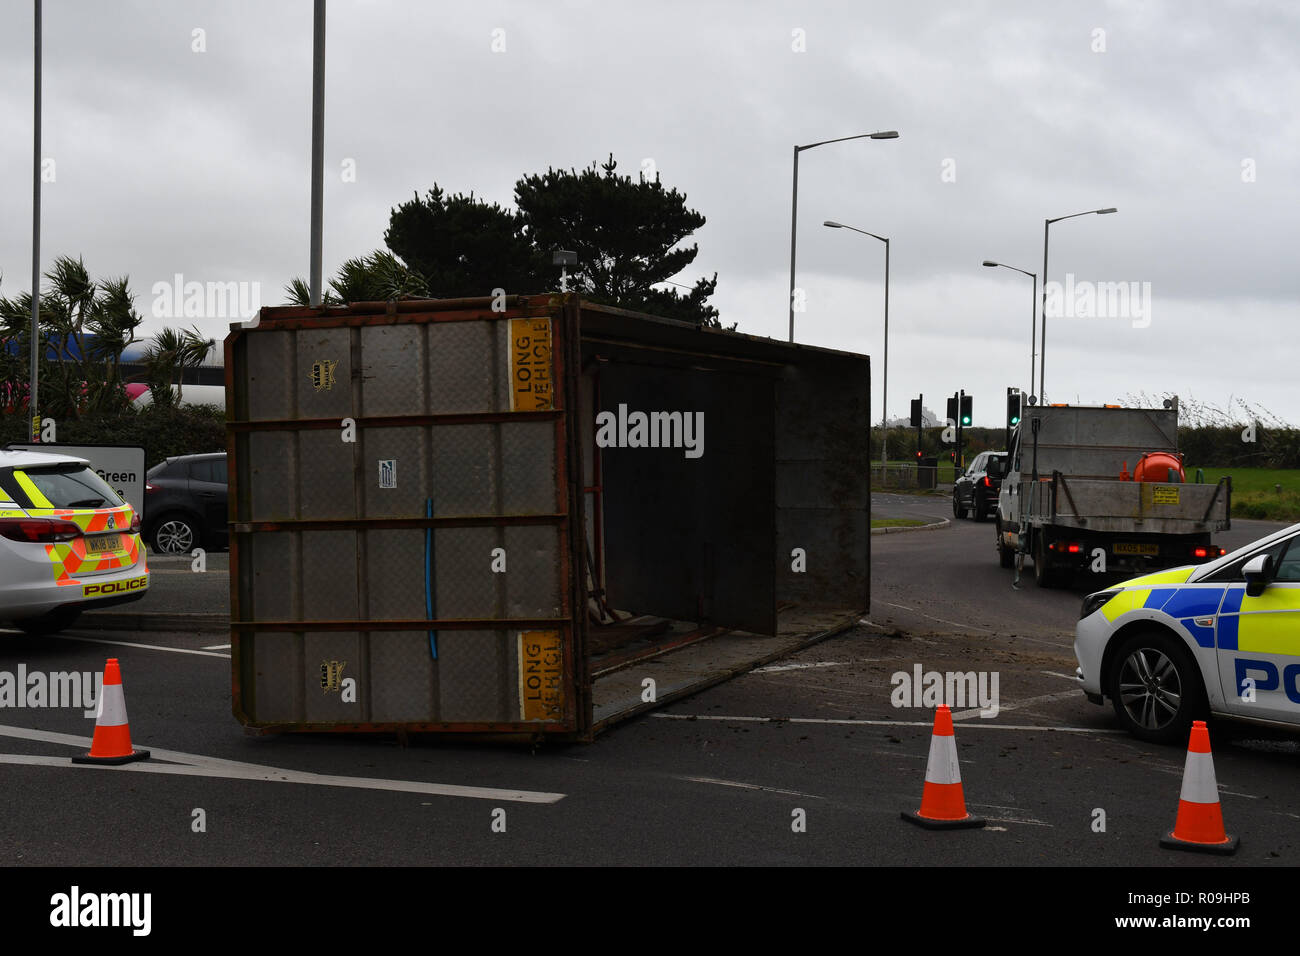 Penzance, Cornwall, UK, 3rd November 2018. UK Weather. High winds brought by storm Oscar cause a trailer of cows to blow over at Penzance. According to an onlooker the cows inside the trailer moved to one side which co-incided with a gust of wind, which resulted in the trailer blowing over at the Tesco roundabout at Penzance. He reported that the cows and the driver were both ok. Credit: Simon Maycock/Alamy Live News Stock Photo